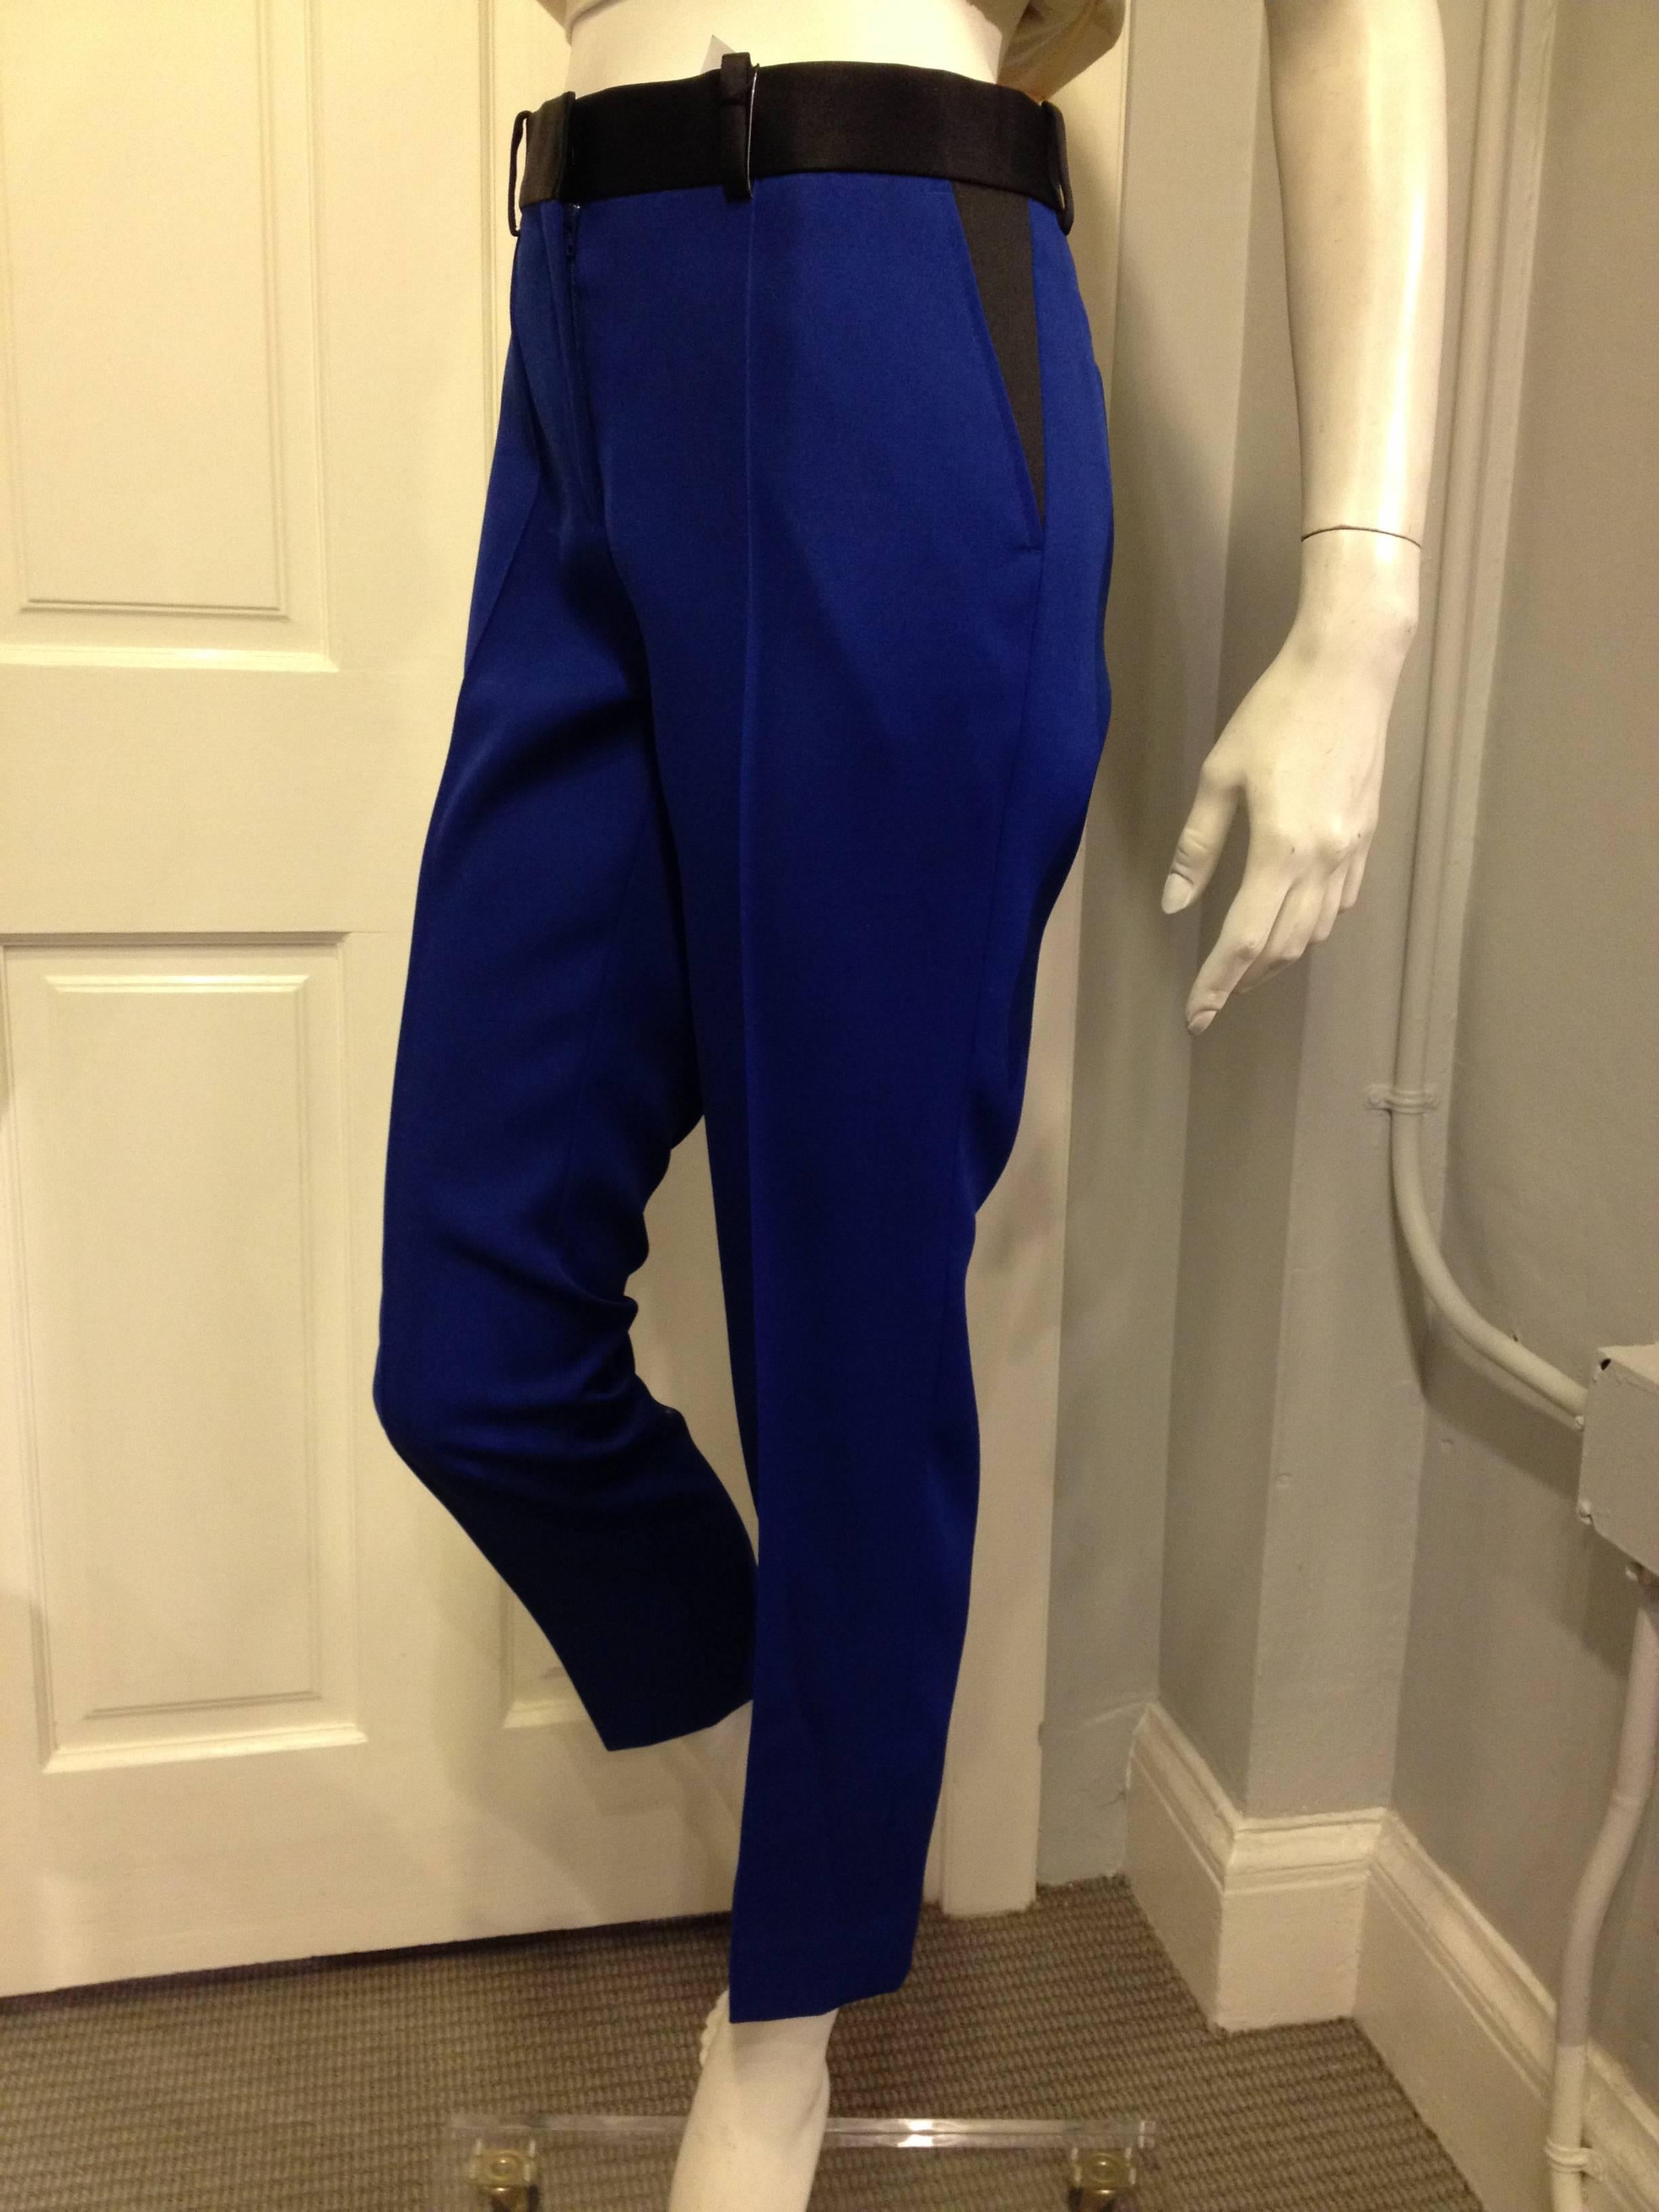 Beautiful and saturated bright blue makes this pair of Celine pants the perfect statement piece. The cut is crisp and very sharp, with a clean crease down the front of each leg and black satin trim along the waistband and at the jetted back pockets.